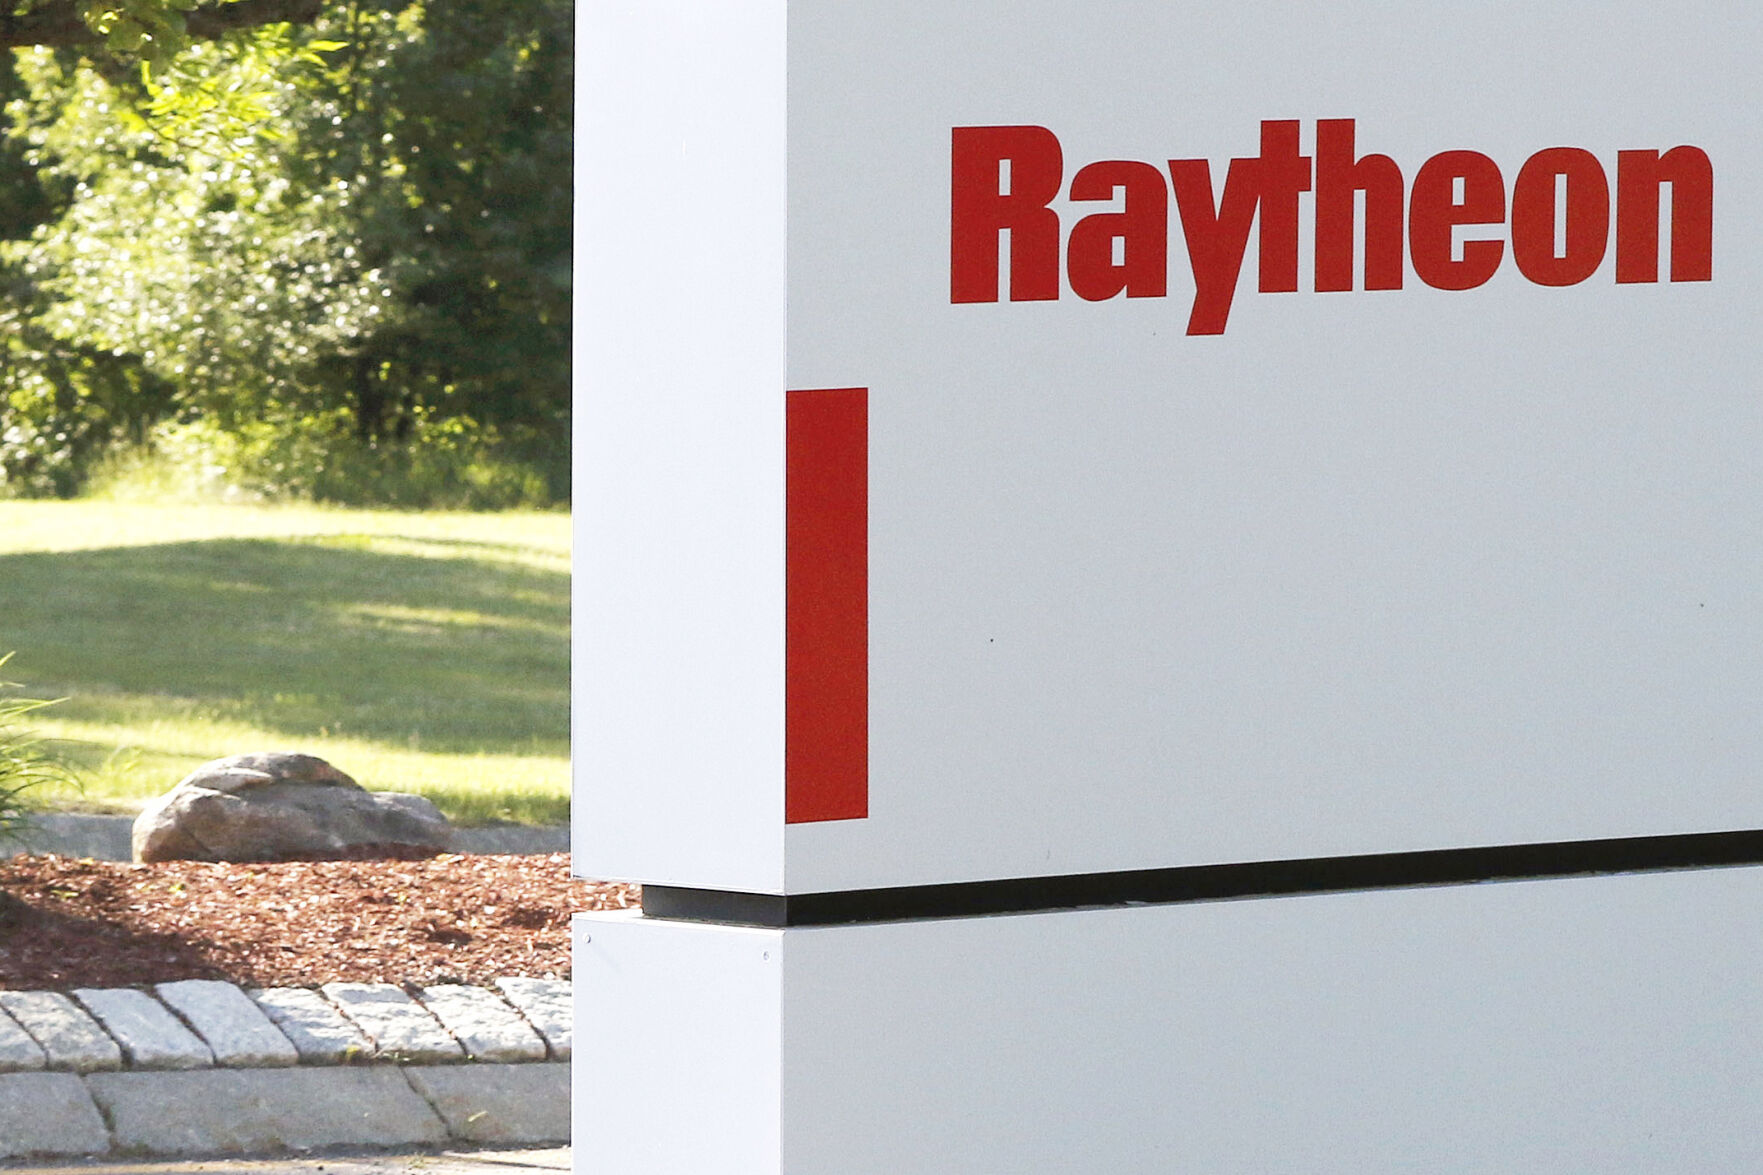 <p>FILE - A sign stands at the road leading to the Raytheon facility in Marlborough, Mass., on June 10, 2019. China on Thursday, Feb. 16, 2023, imposed trade and investment sanctions on U.S. military contractors Lockheed Martin and Raytheon for supplying weapons to Taiwan, stepping up efforts to isolate the island democracy claimed by the ruling Communist Party as part of its territory. (AP Photo/Bill Sikes, File)</p>   PHOTO CREDIT: Bill Sikes